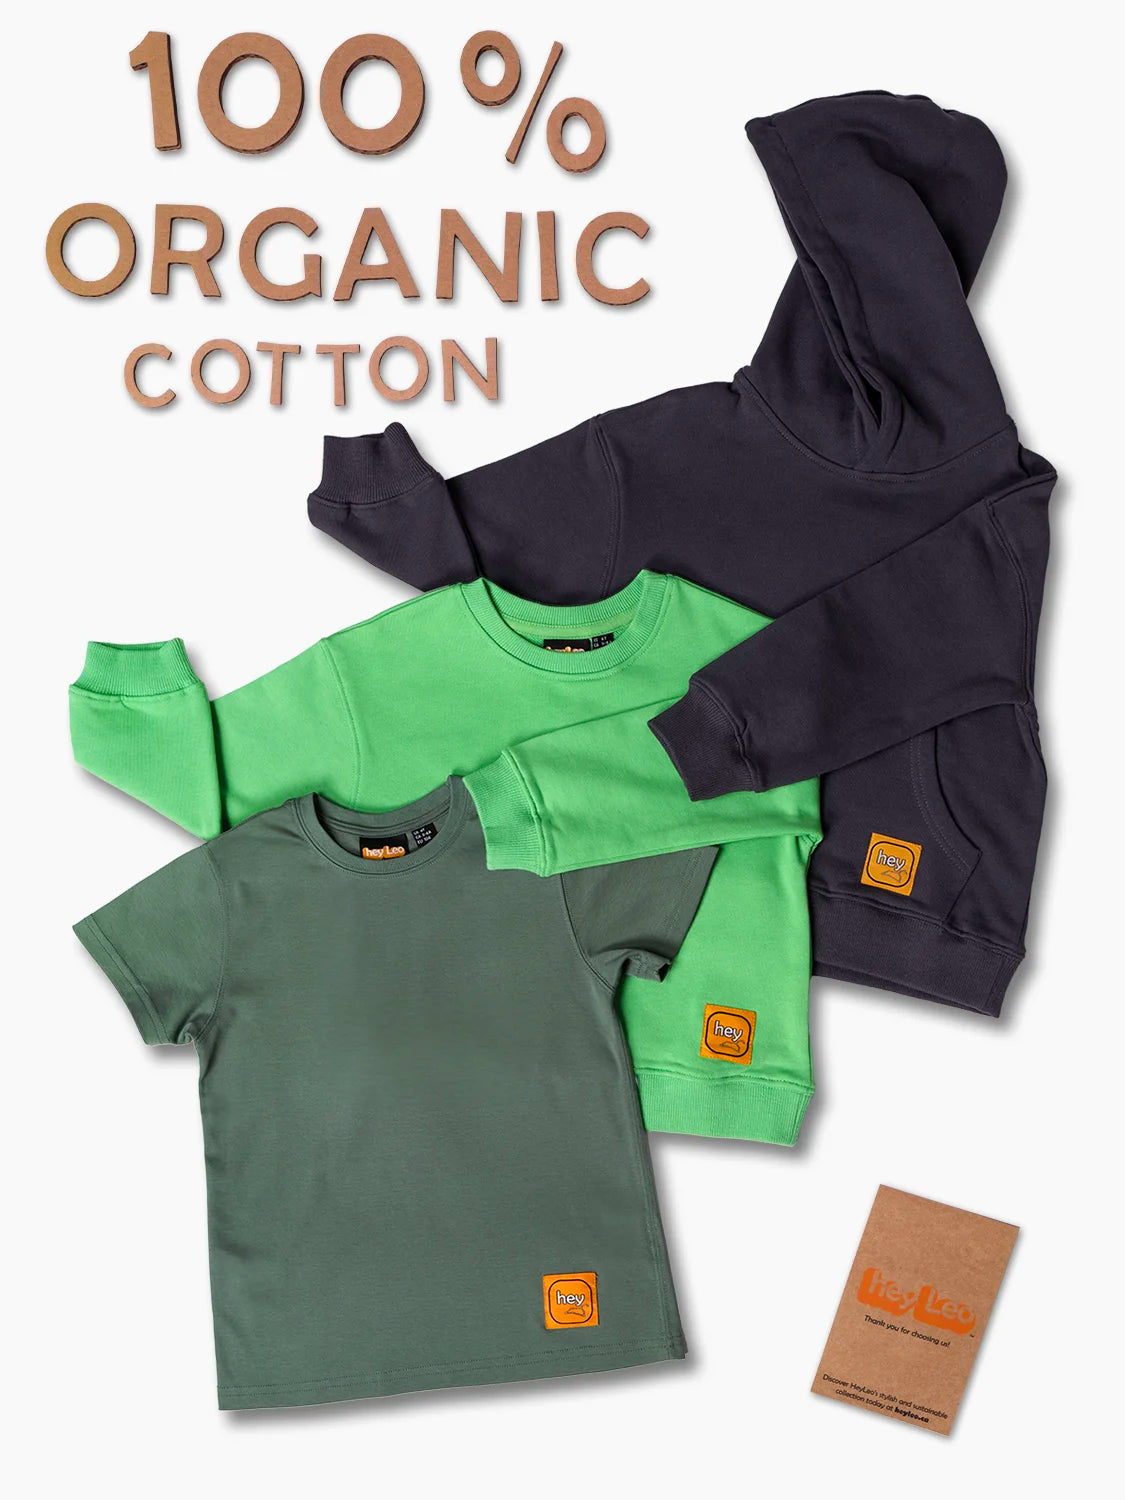 100% Organic Cotton 3-piece Outfit Set Gray/Green